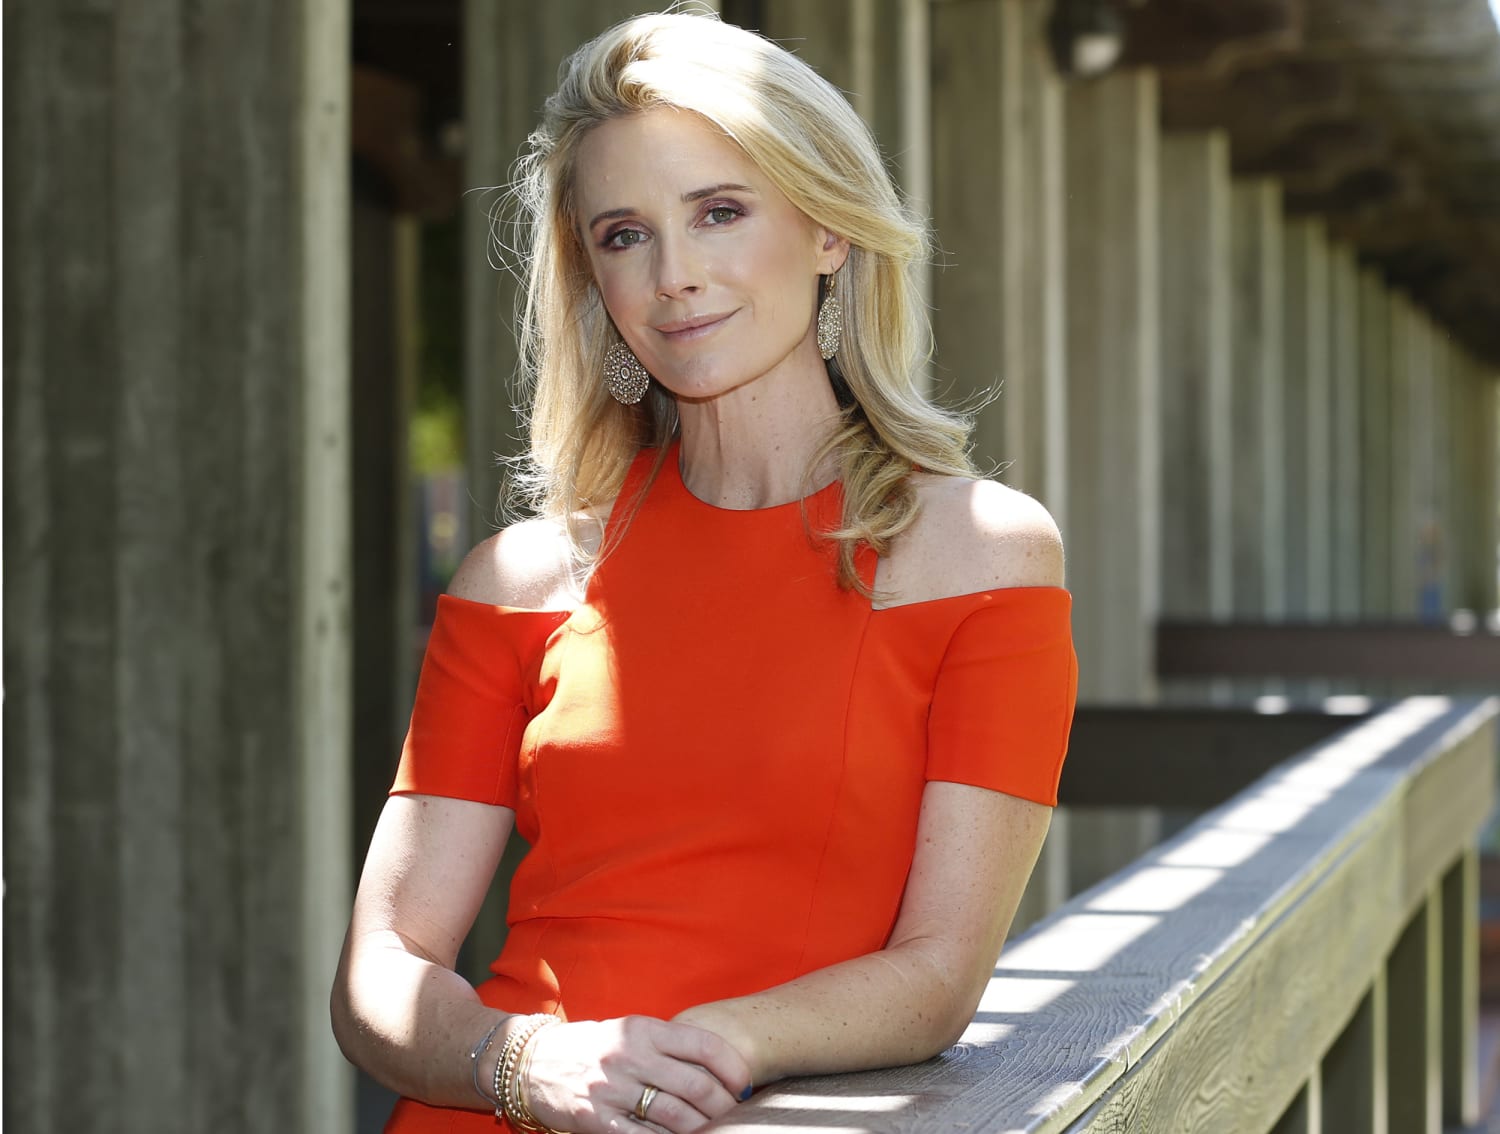 Jennifer Siebel Newsom, actor married to California governor, breaks down in tears at Harvey Weinsteins sex crimes trial image